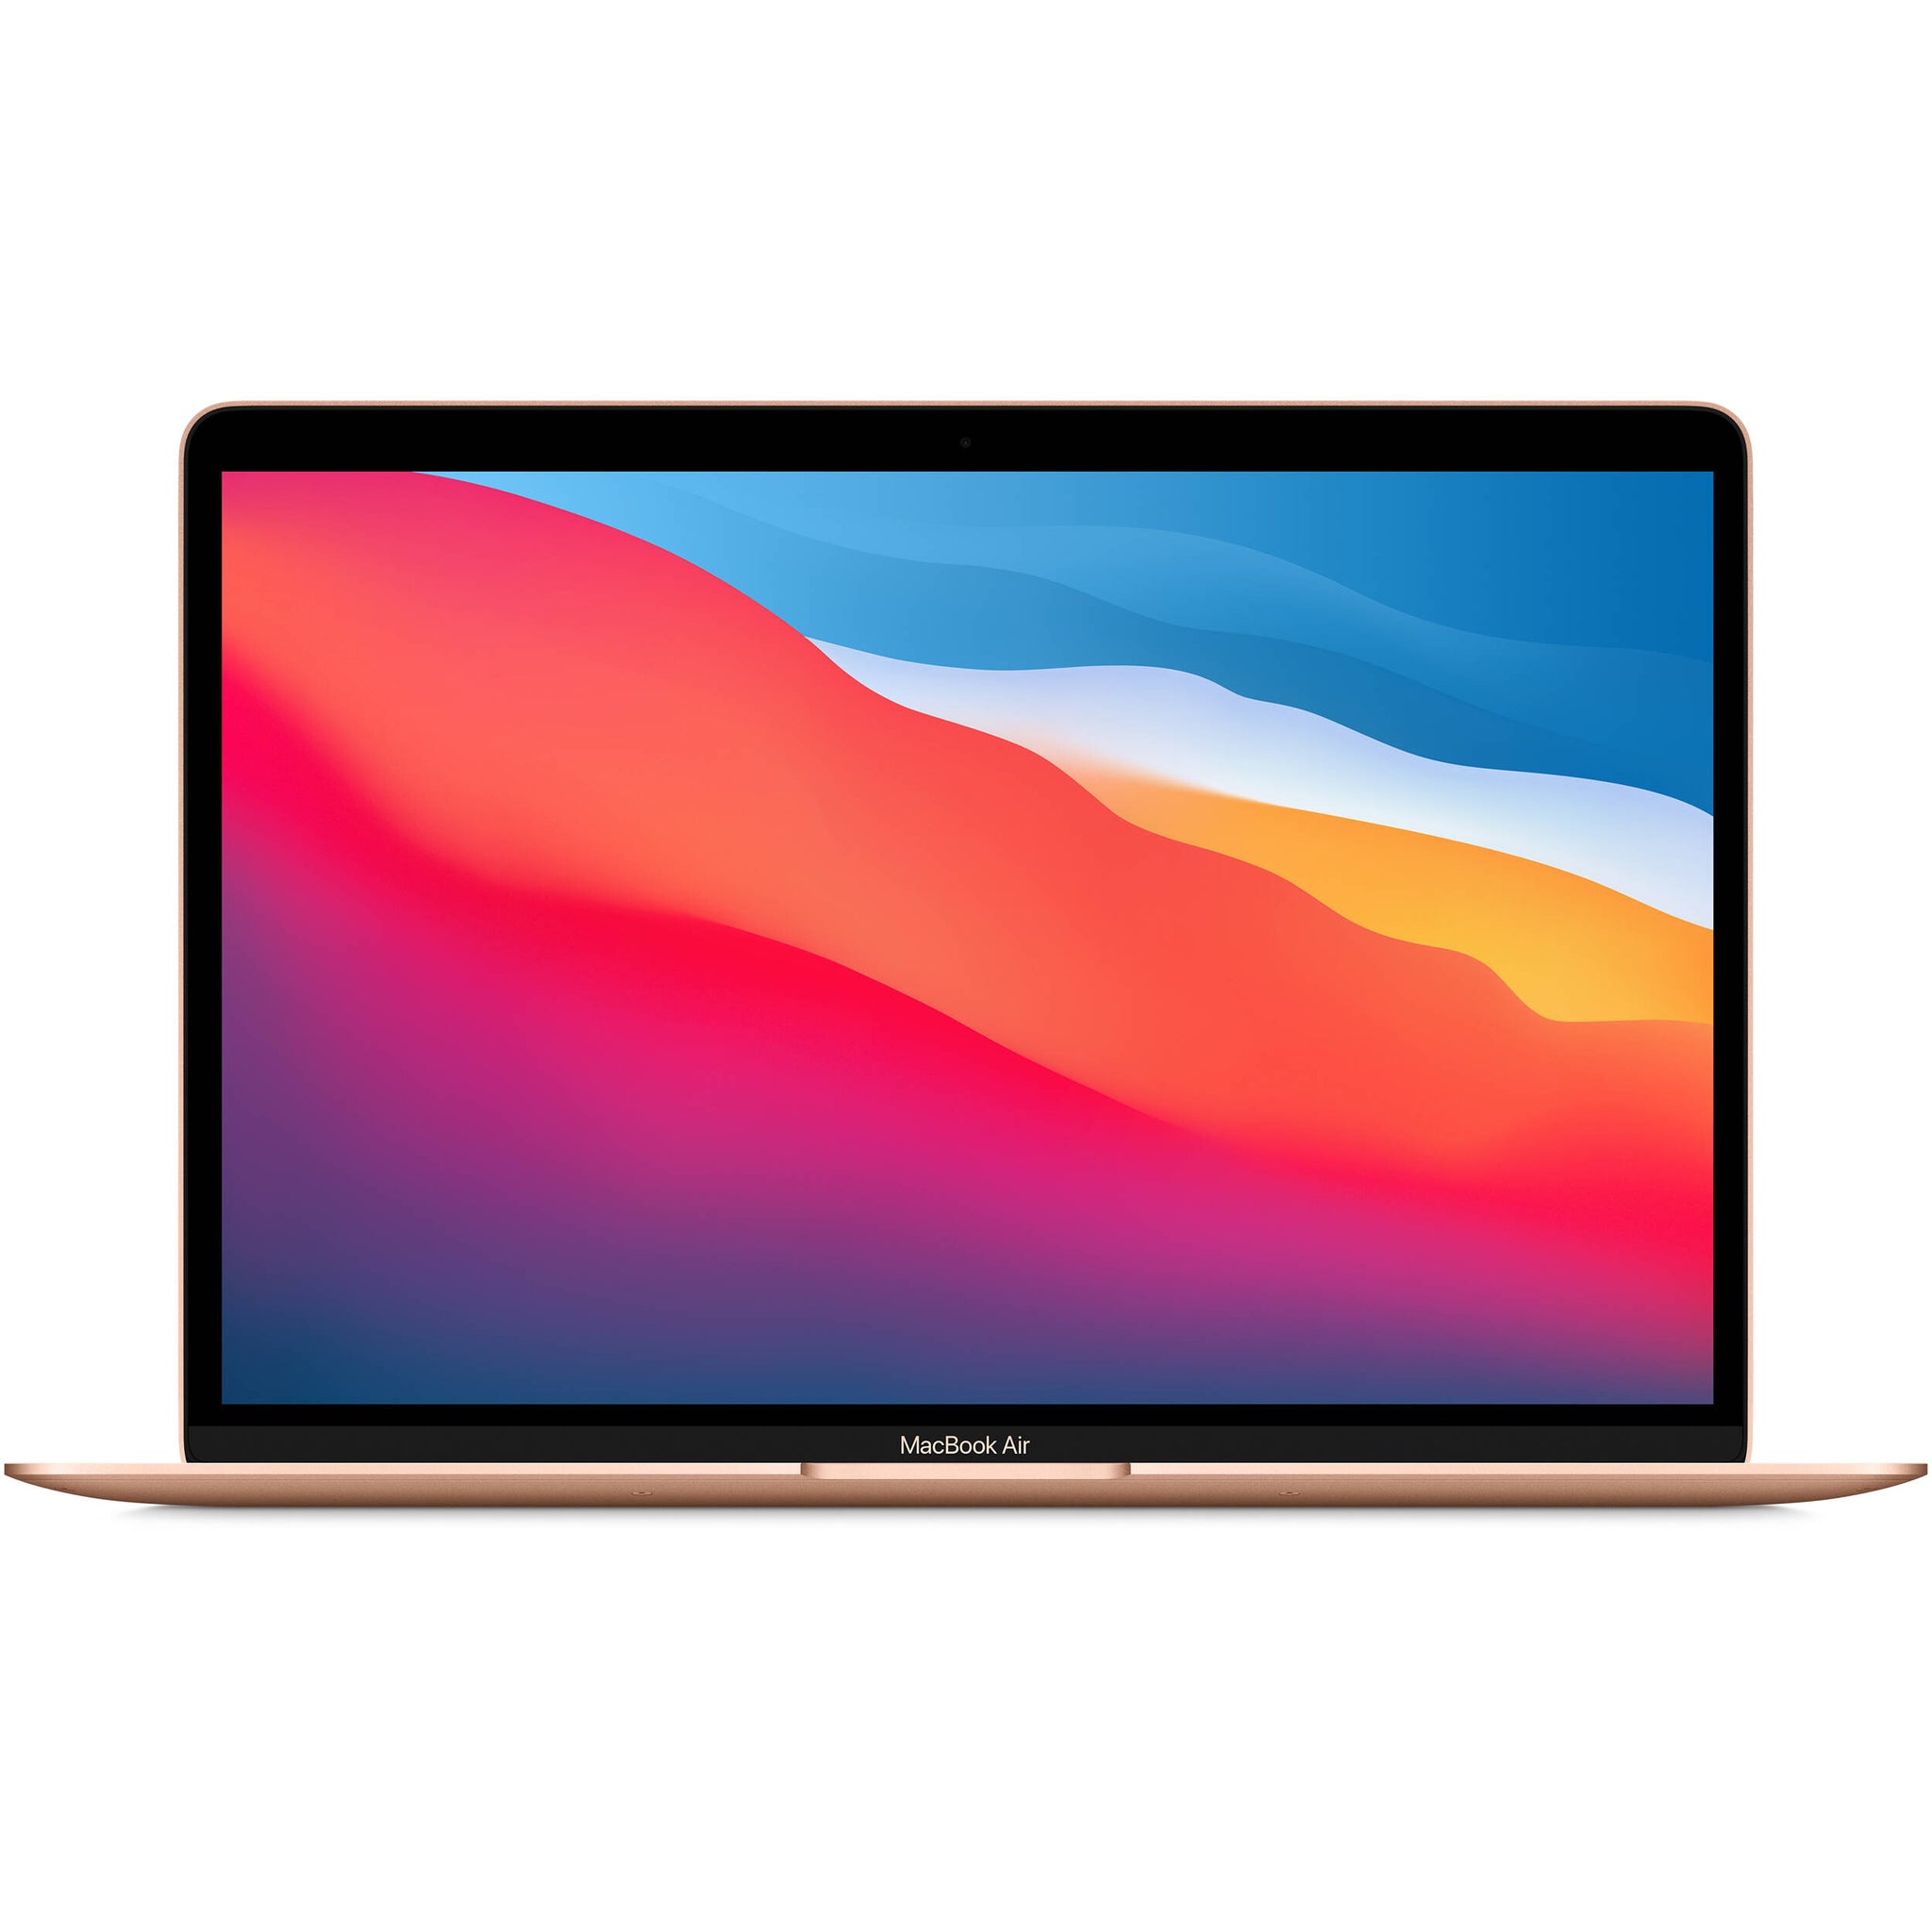 Apple MacBook Air M1 Chip with Retina Display (Late 2020,) GOLD 256 SSD 8GB 13.3